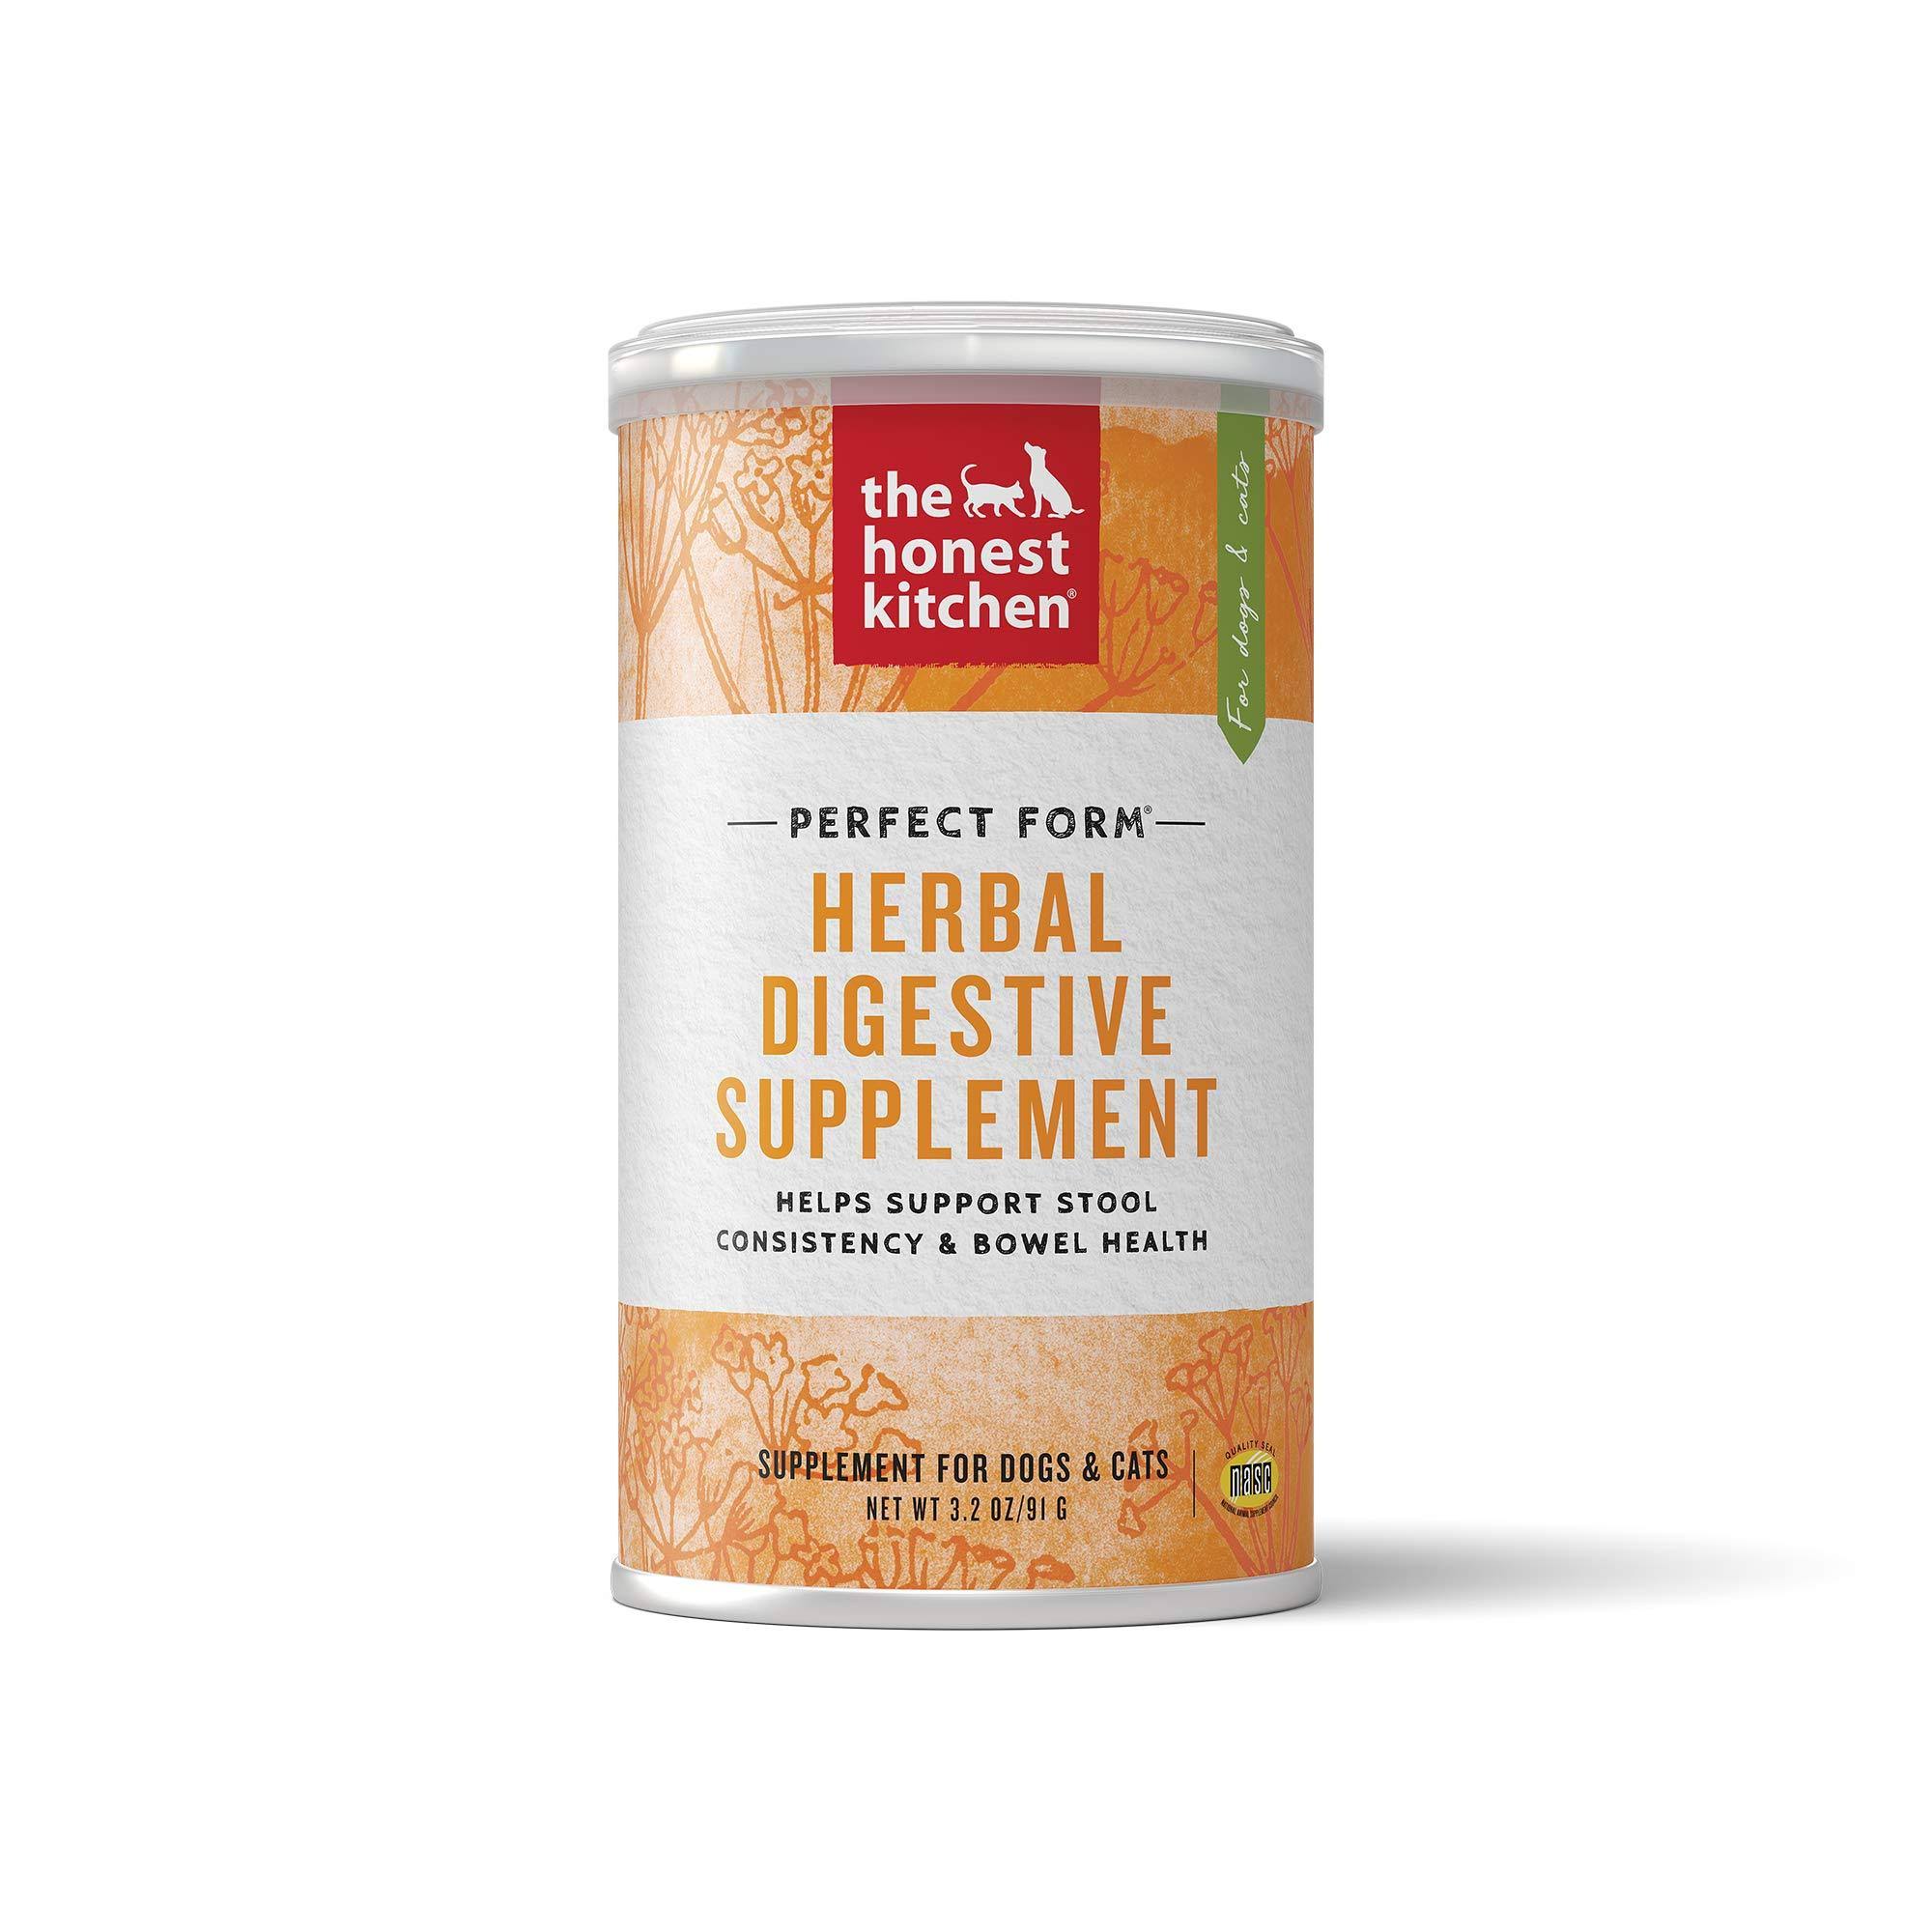 Perfect Form Herbal Digestive Supplement 3.2 oz. | The Honest Kitchen